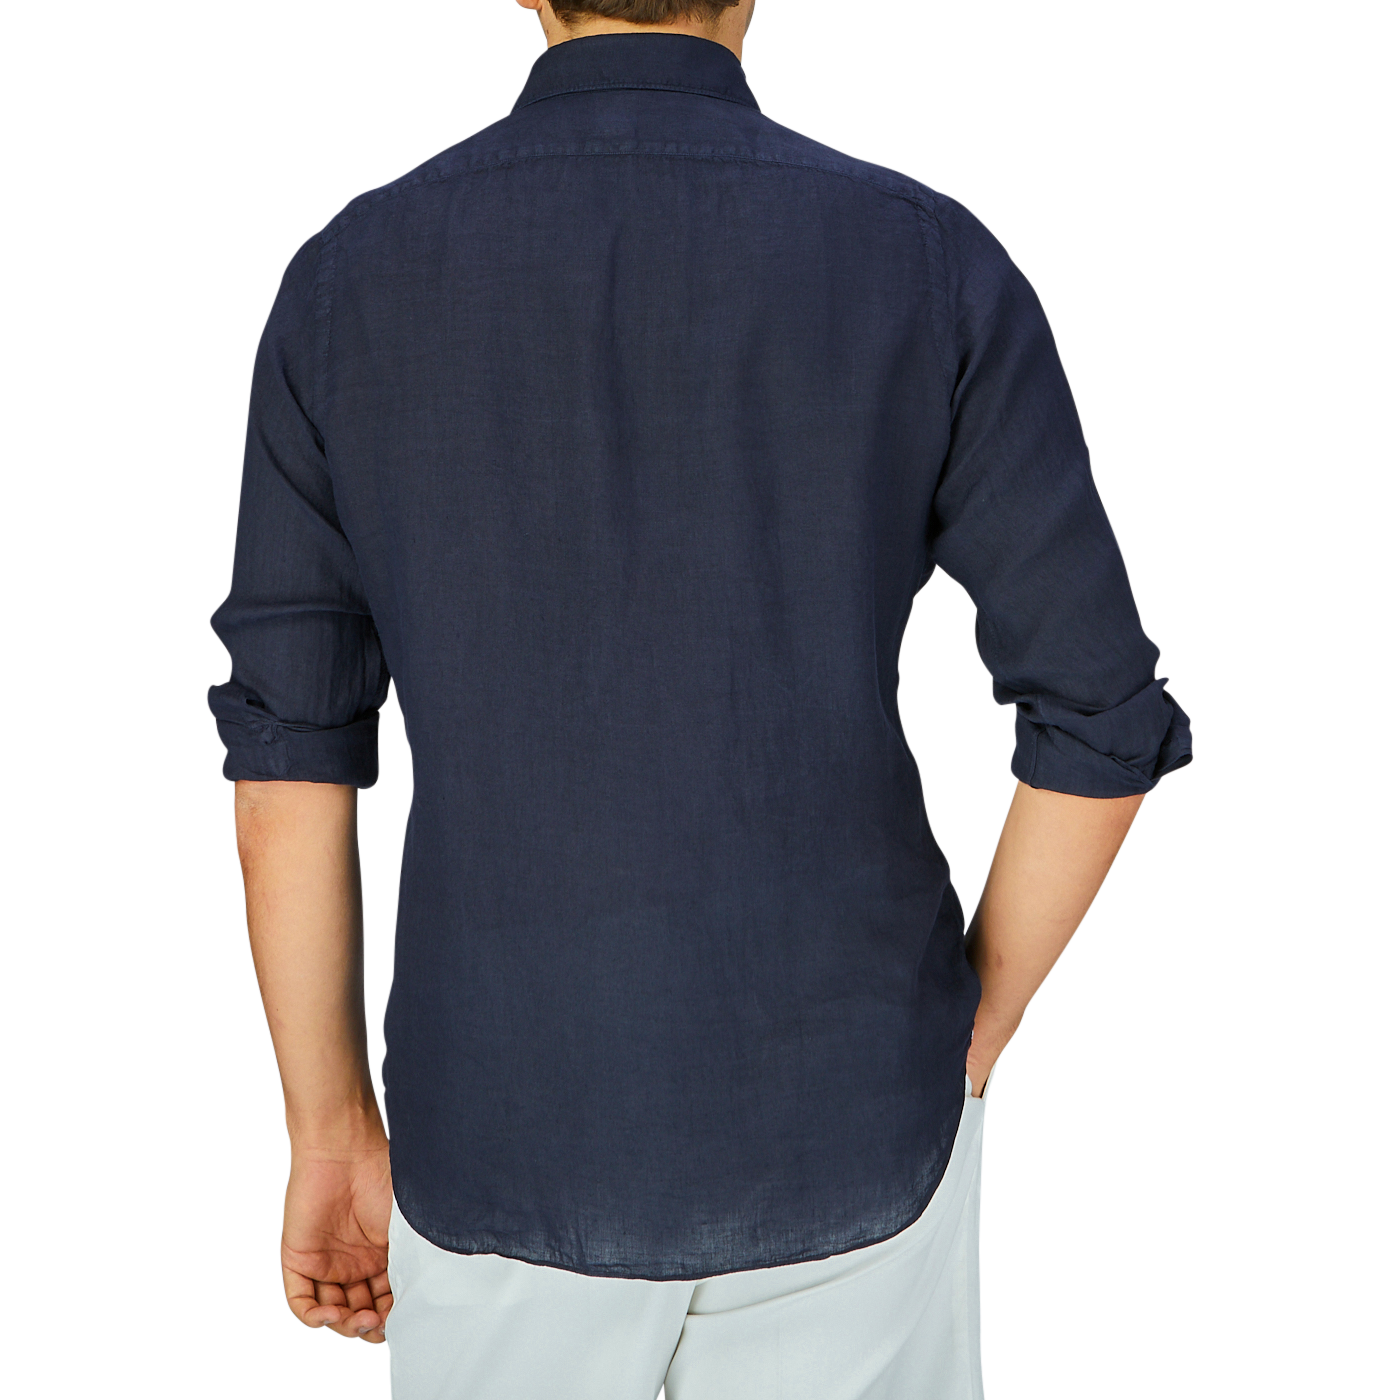 Man from behind wearing a Finamore Navy Blue Linen Casual Shirt with rolled-up cuffs.